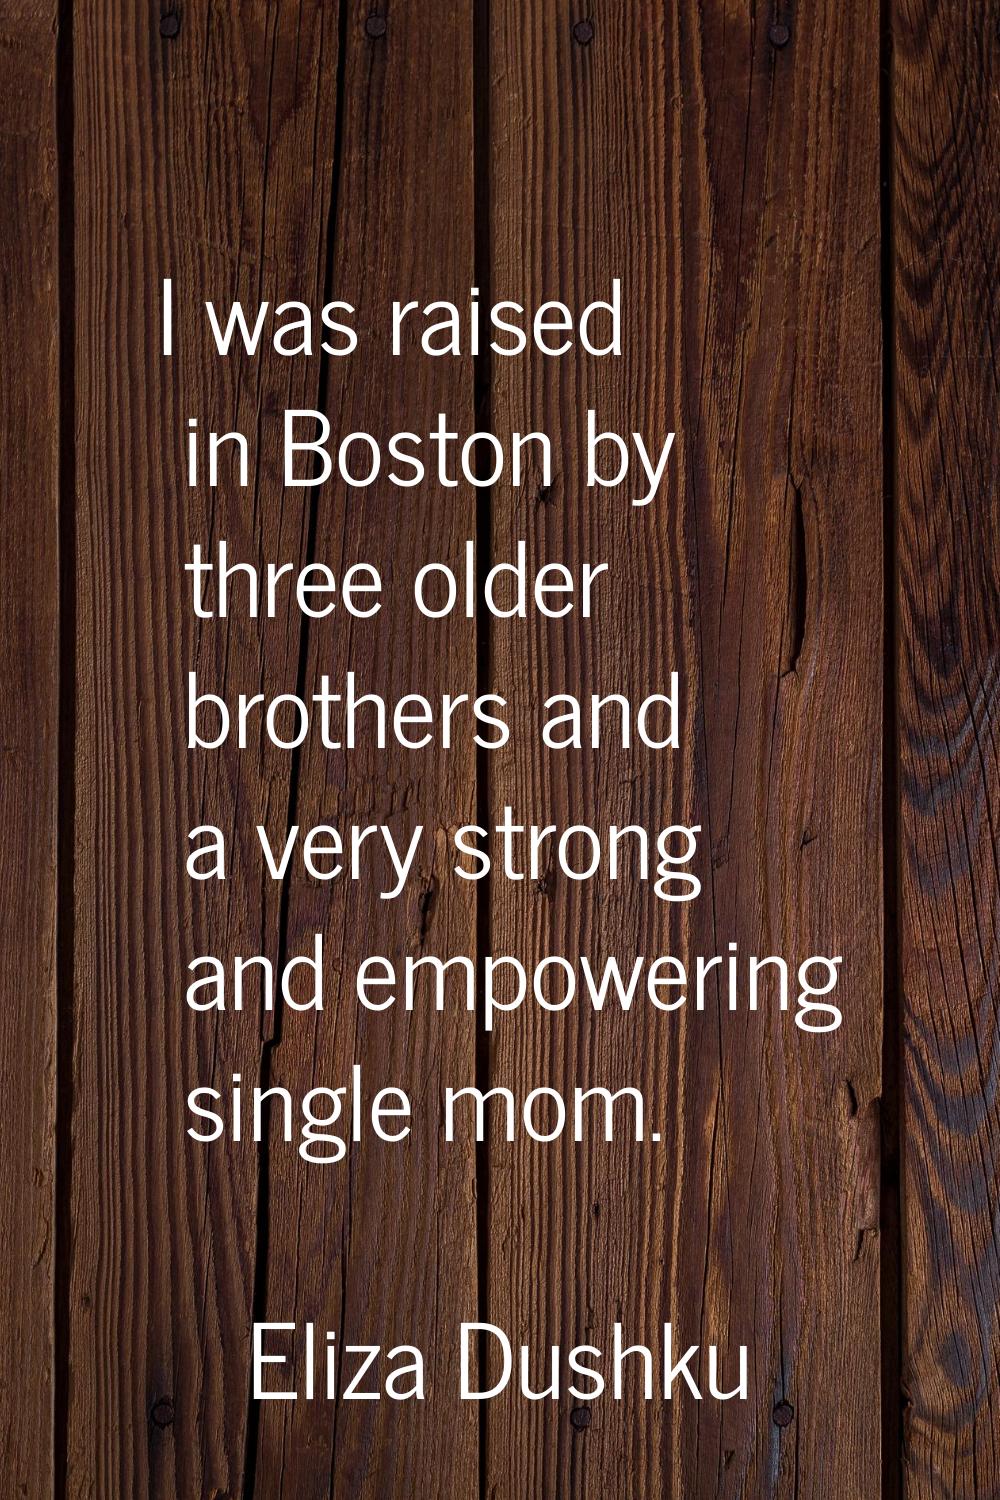 I was raised in Boston by three older brothers and a very strong and empowering single mom.